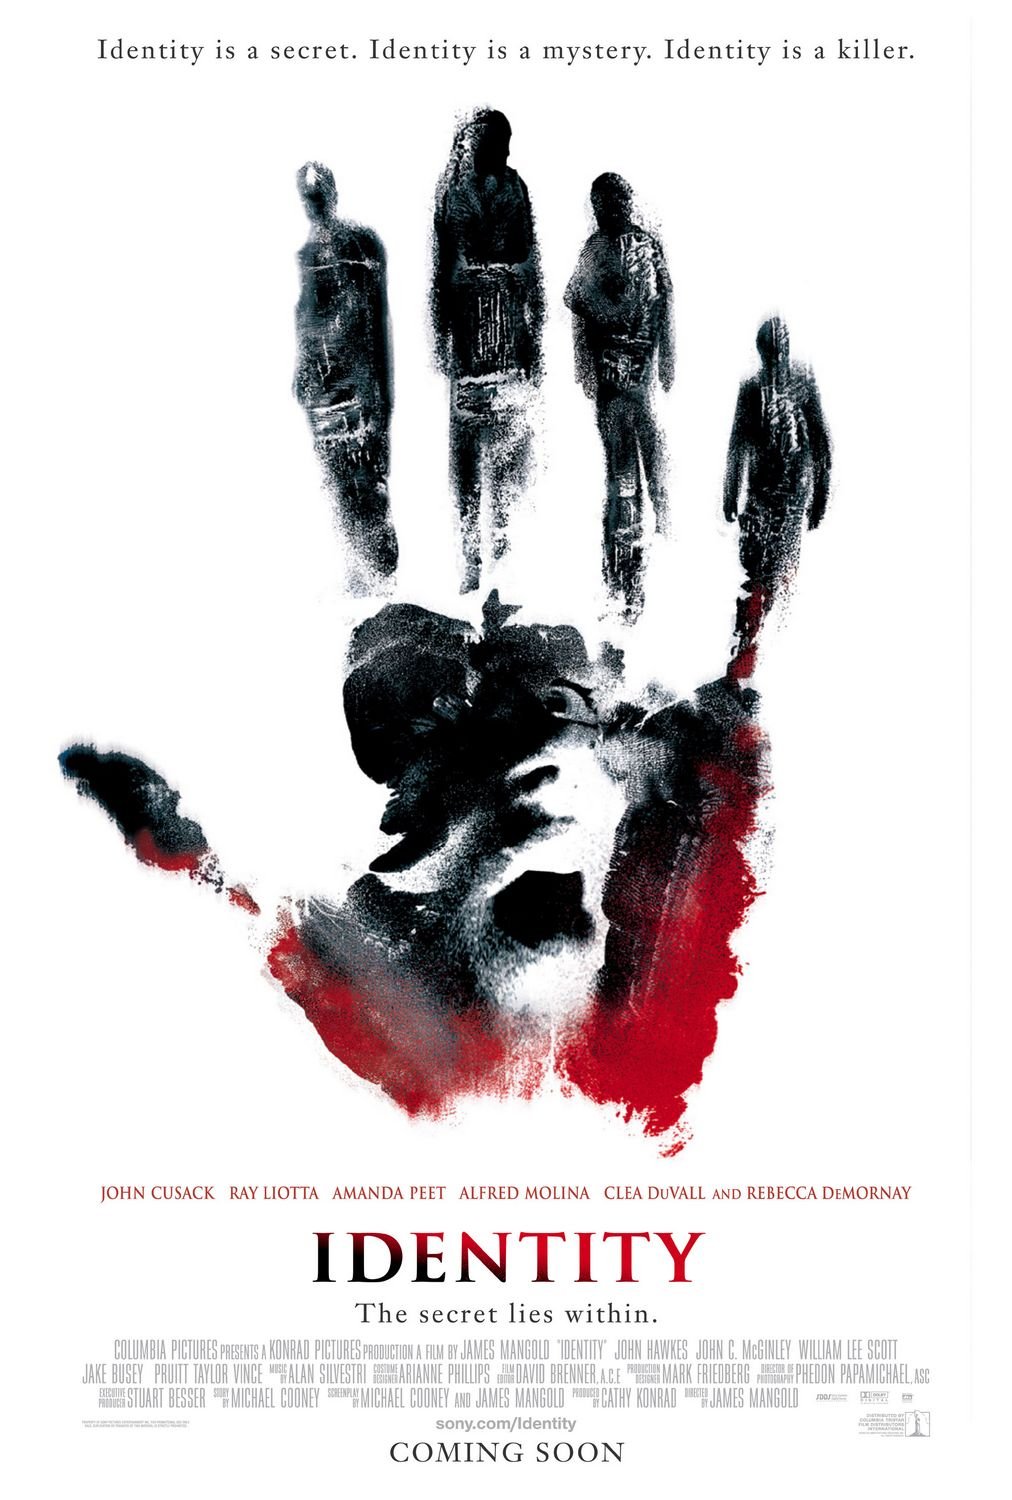 Poster of the movie Identity